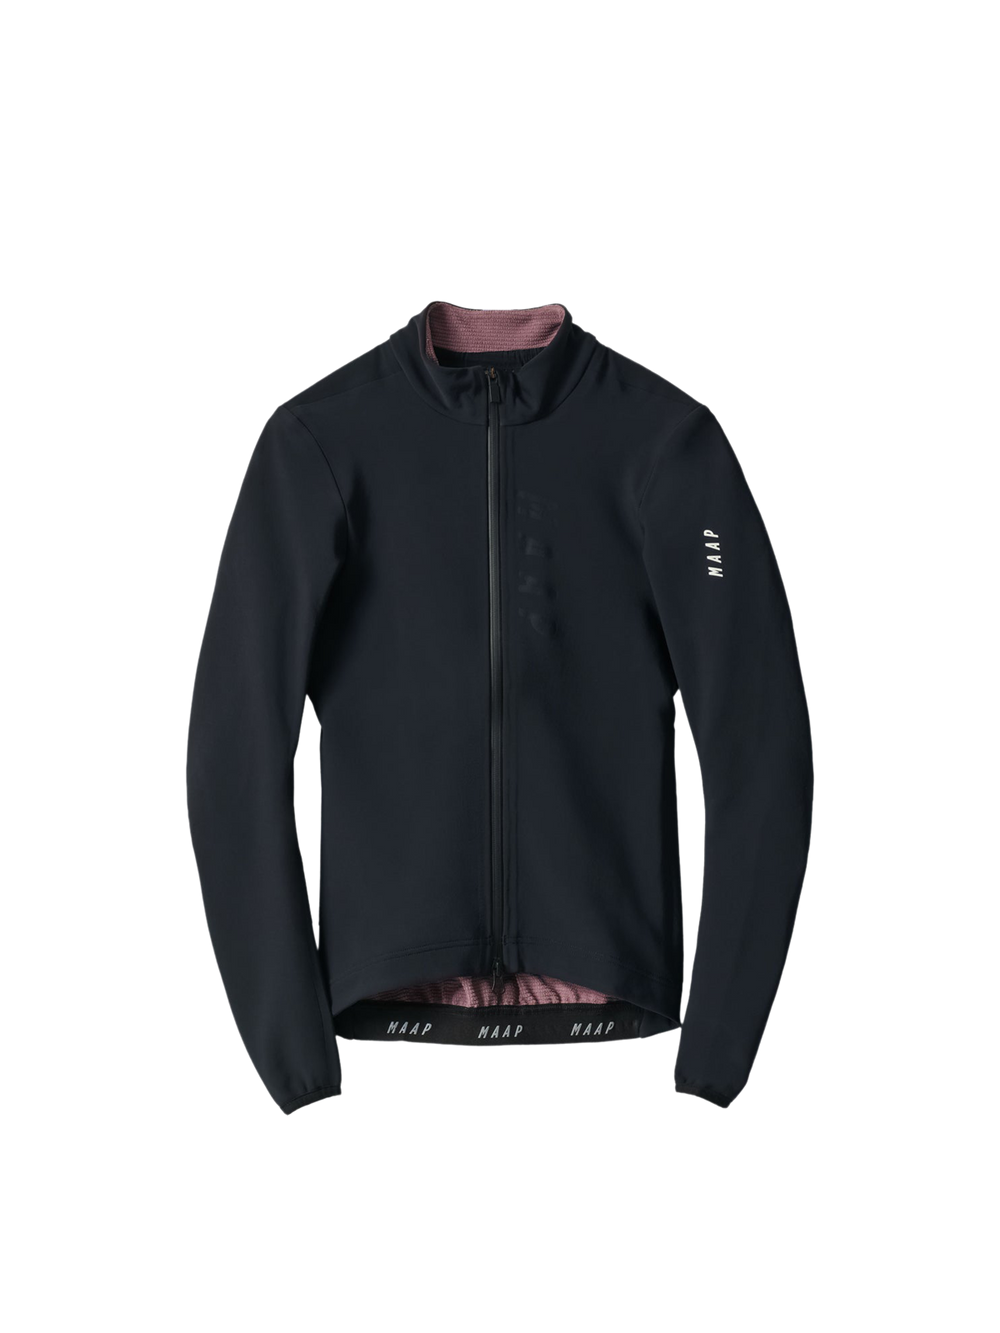 Product Image for Women's Apex Winter Jacket 2.0